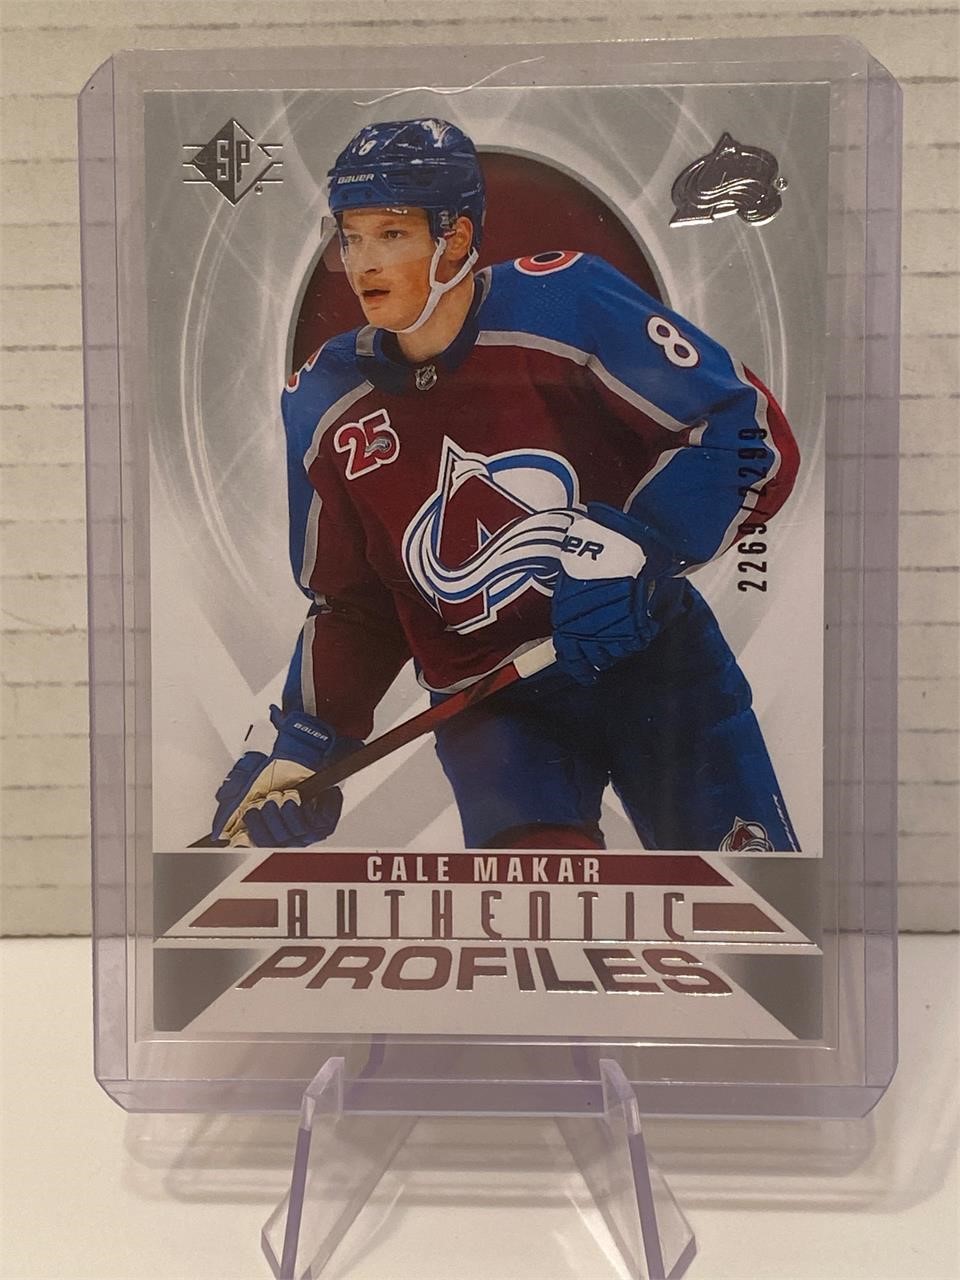 Cale Makar Authentic Profiles Numbered Card